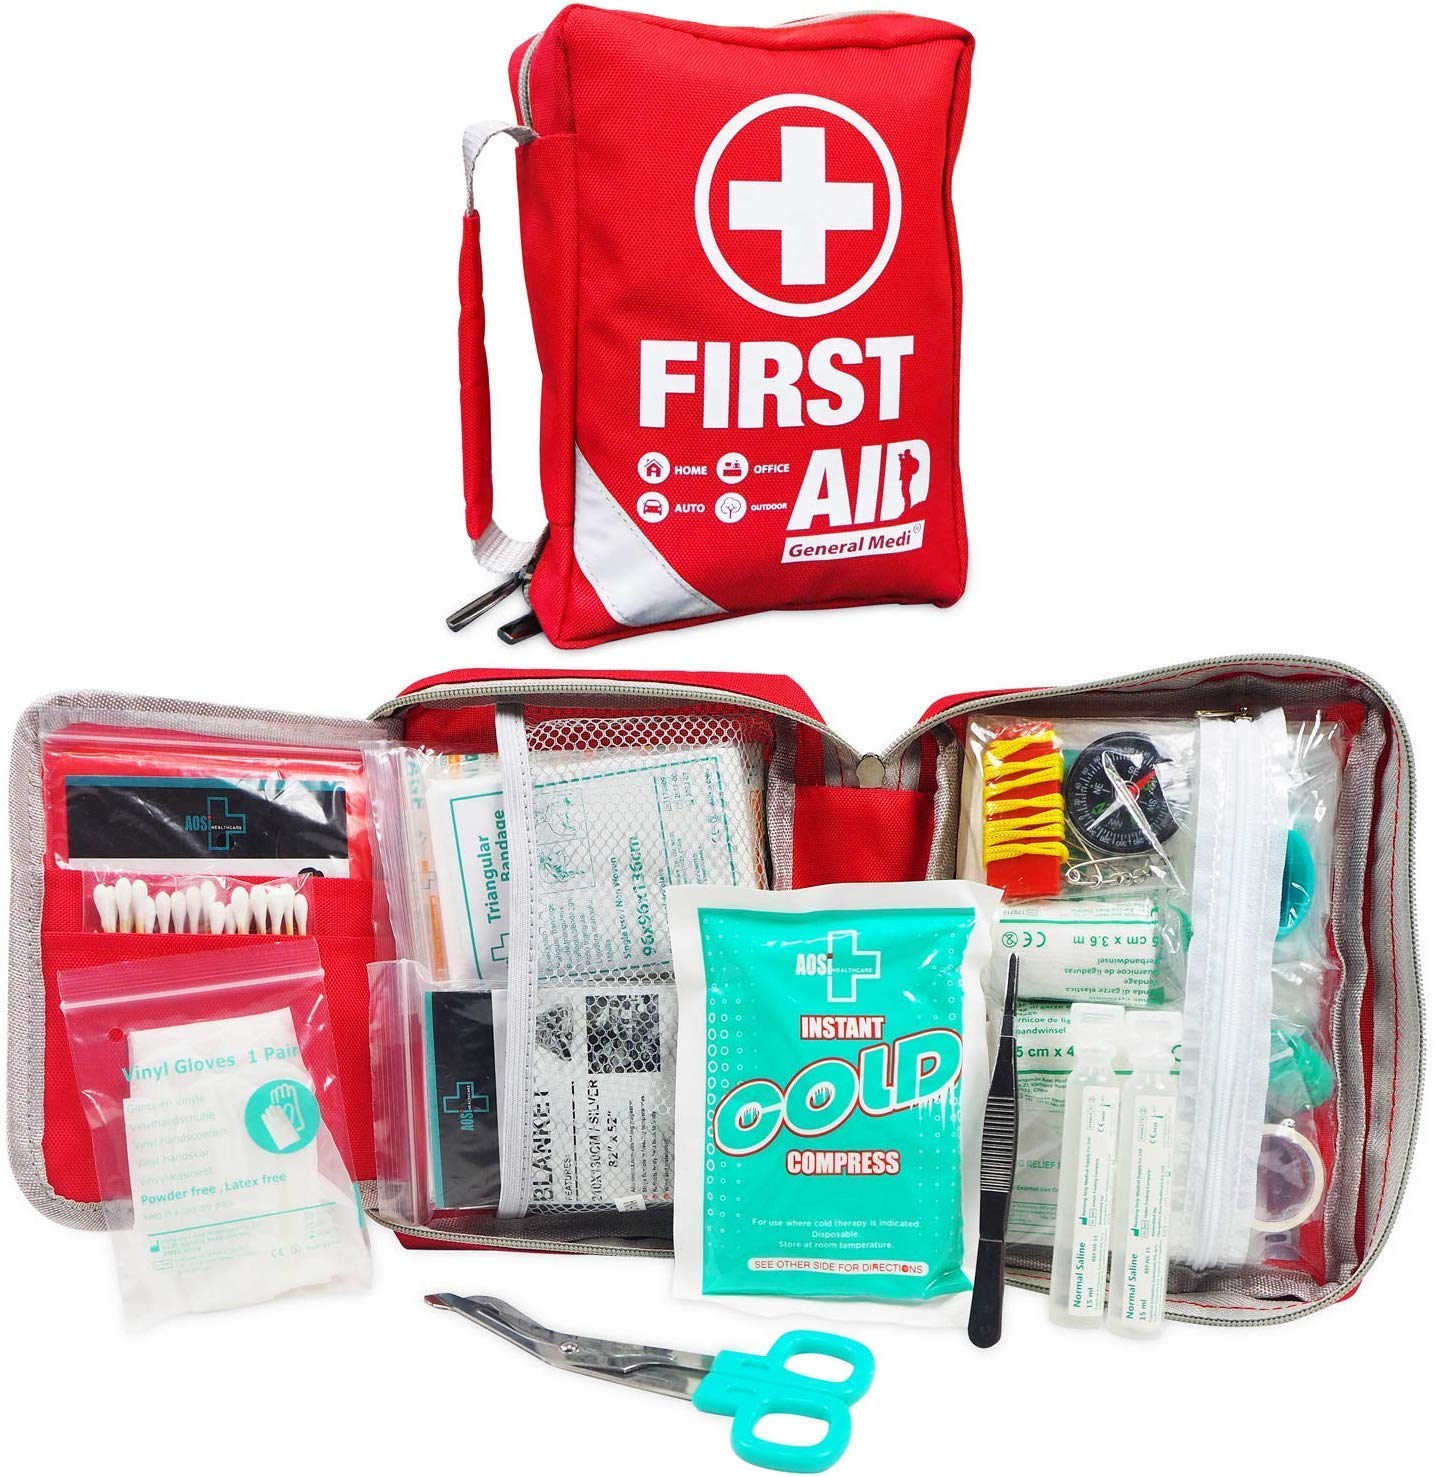 First Aid Kit - Small Compact First Aid Kit Bag